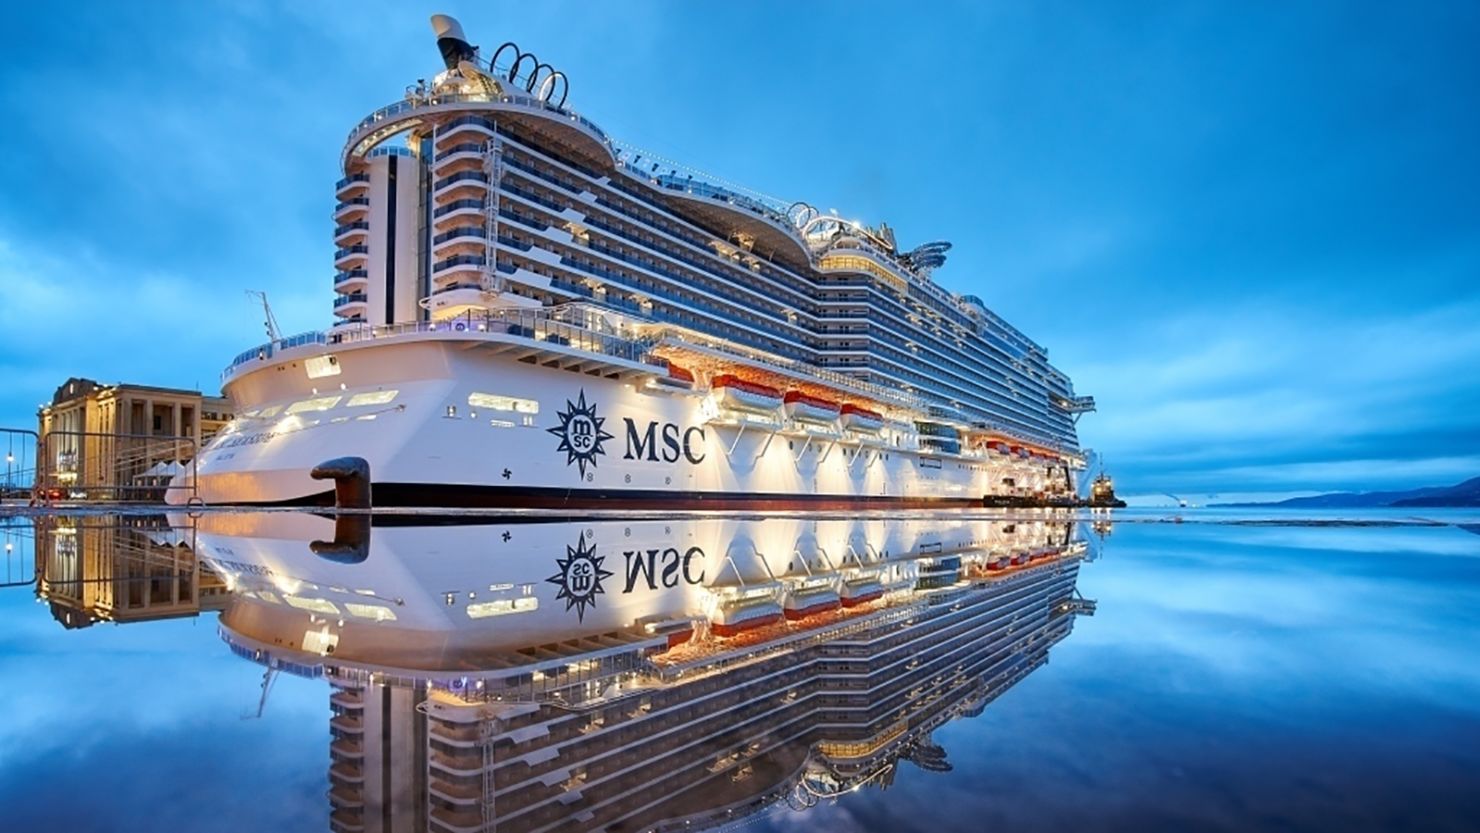 The MSC Seaside cruise ship pictured here in 2017.